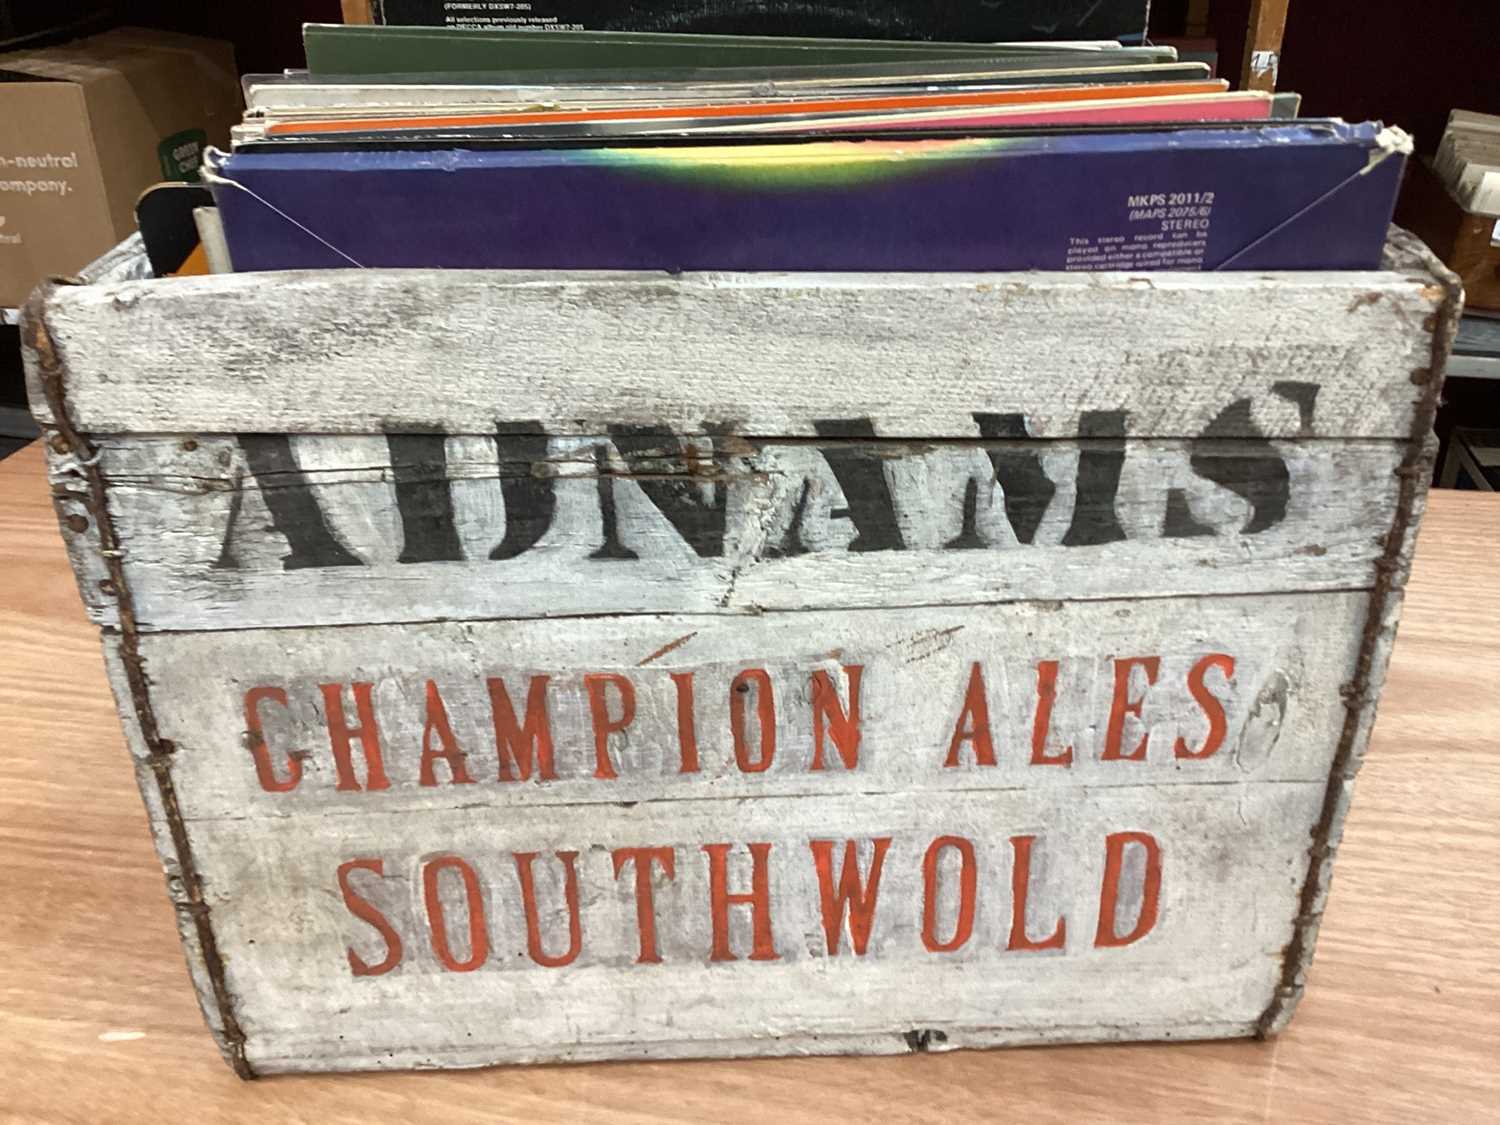 Adnams beer crate, c1950s, painted white with ‘Adnams and Co Ltd Champion Ales’ in red, and ‘Southwo - Image 2 of 15